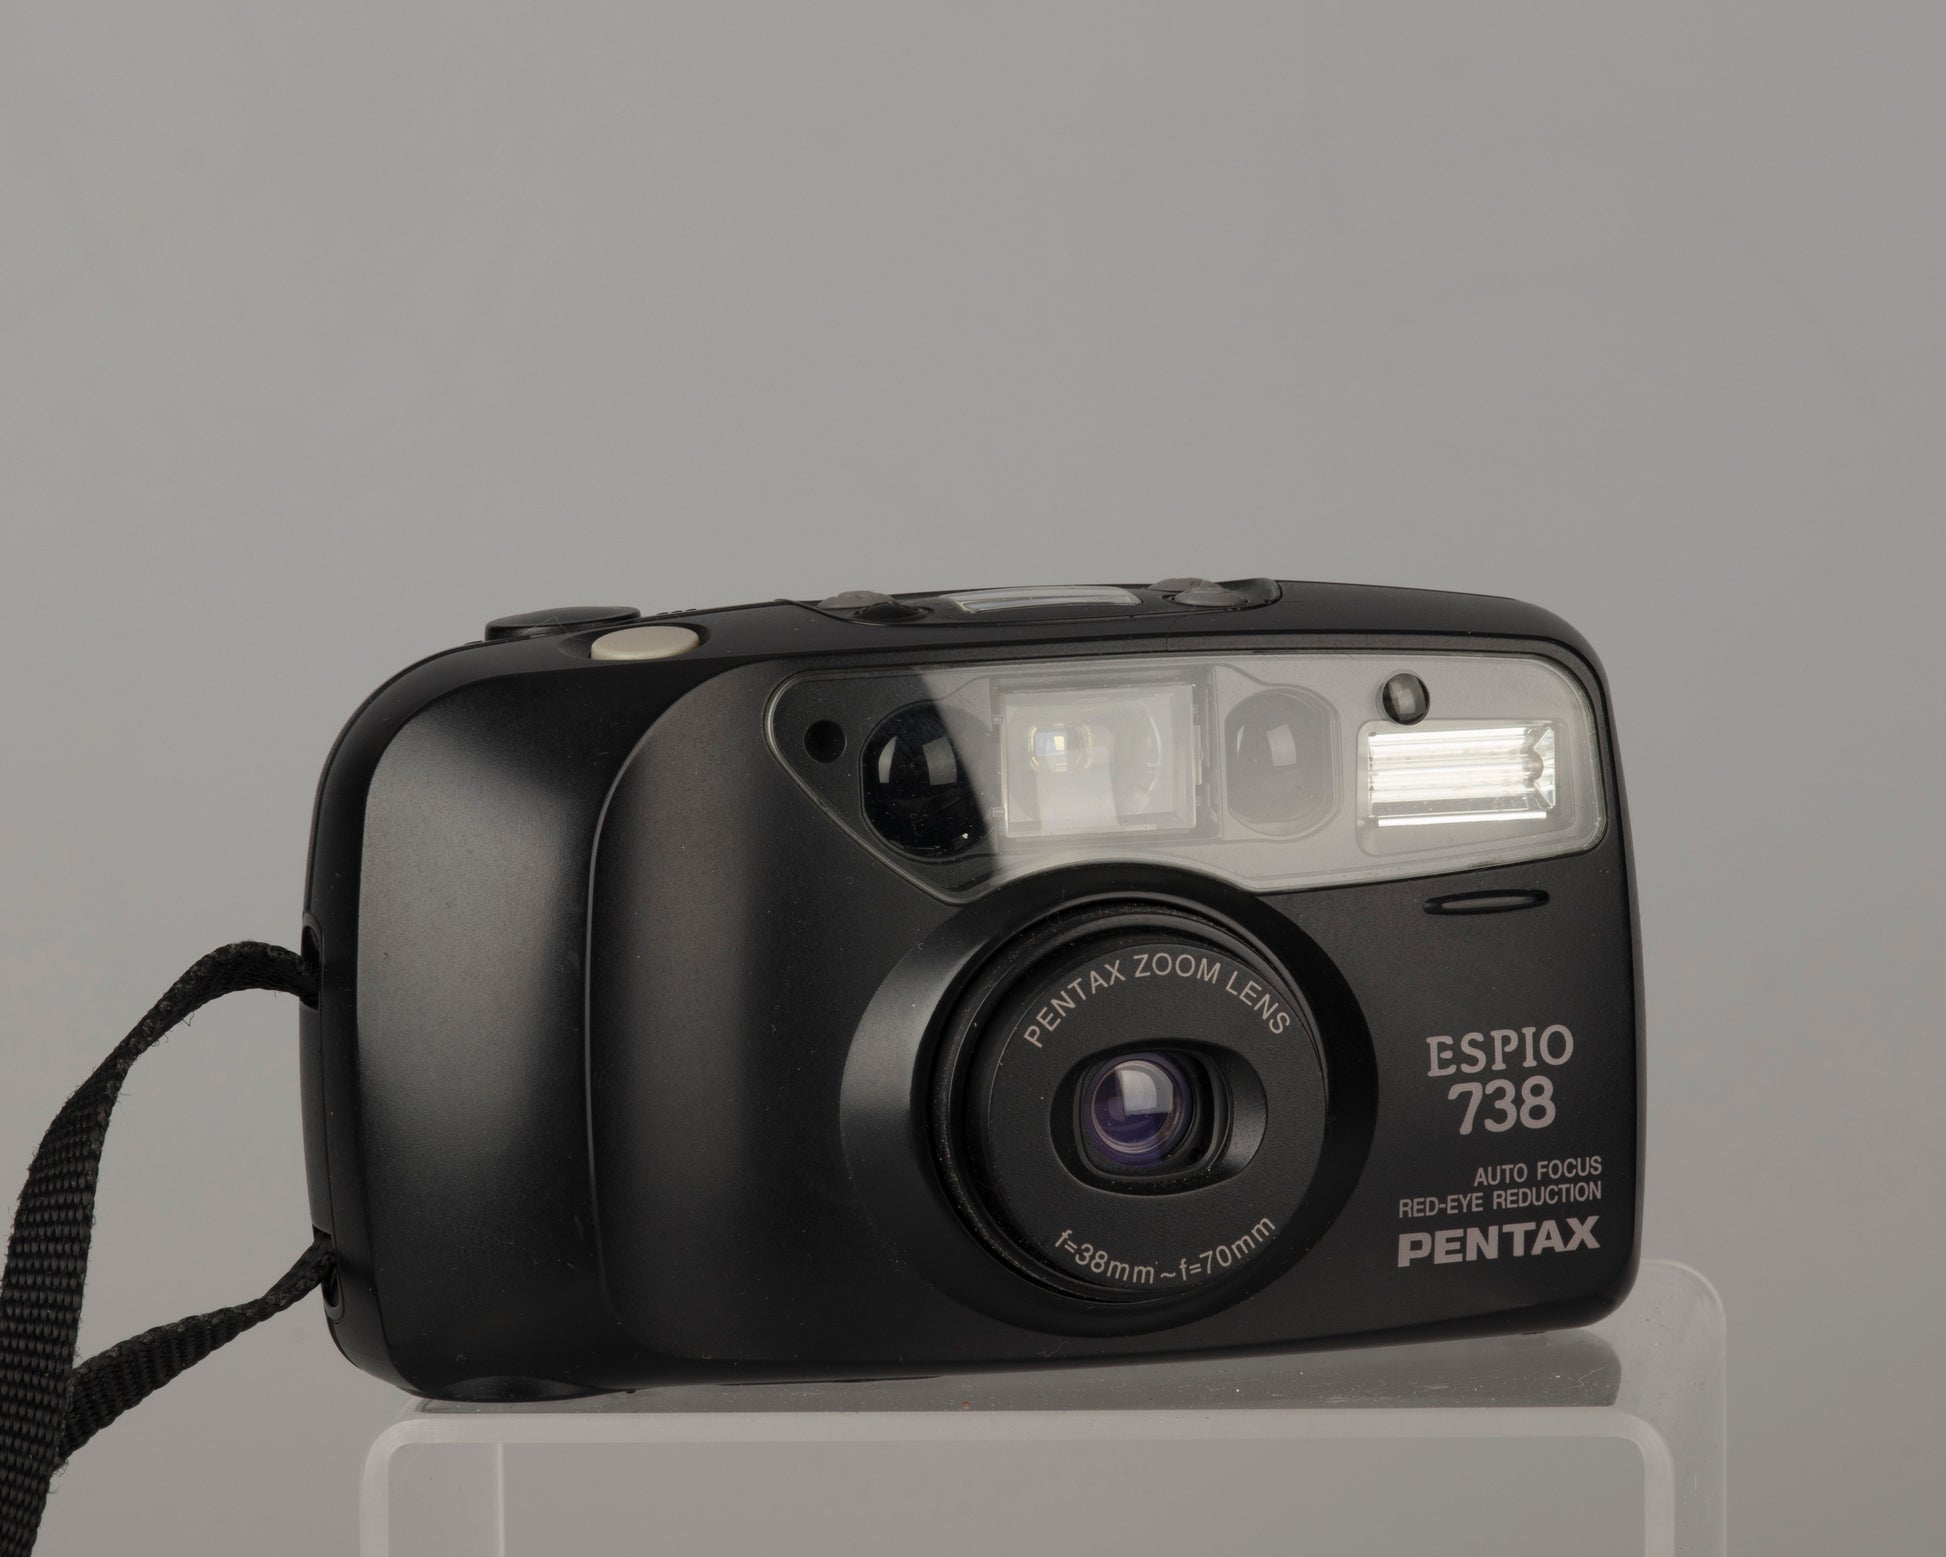 The Pentax Espio 738 is one of the better plastic 35mm point and shoot cameras from the 1990s. 